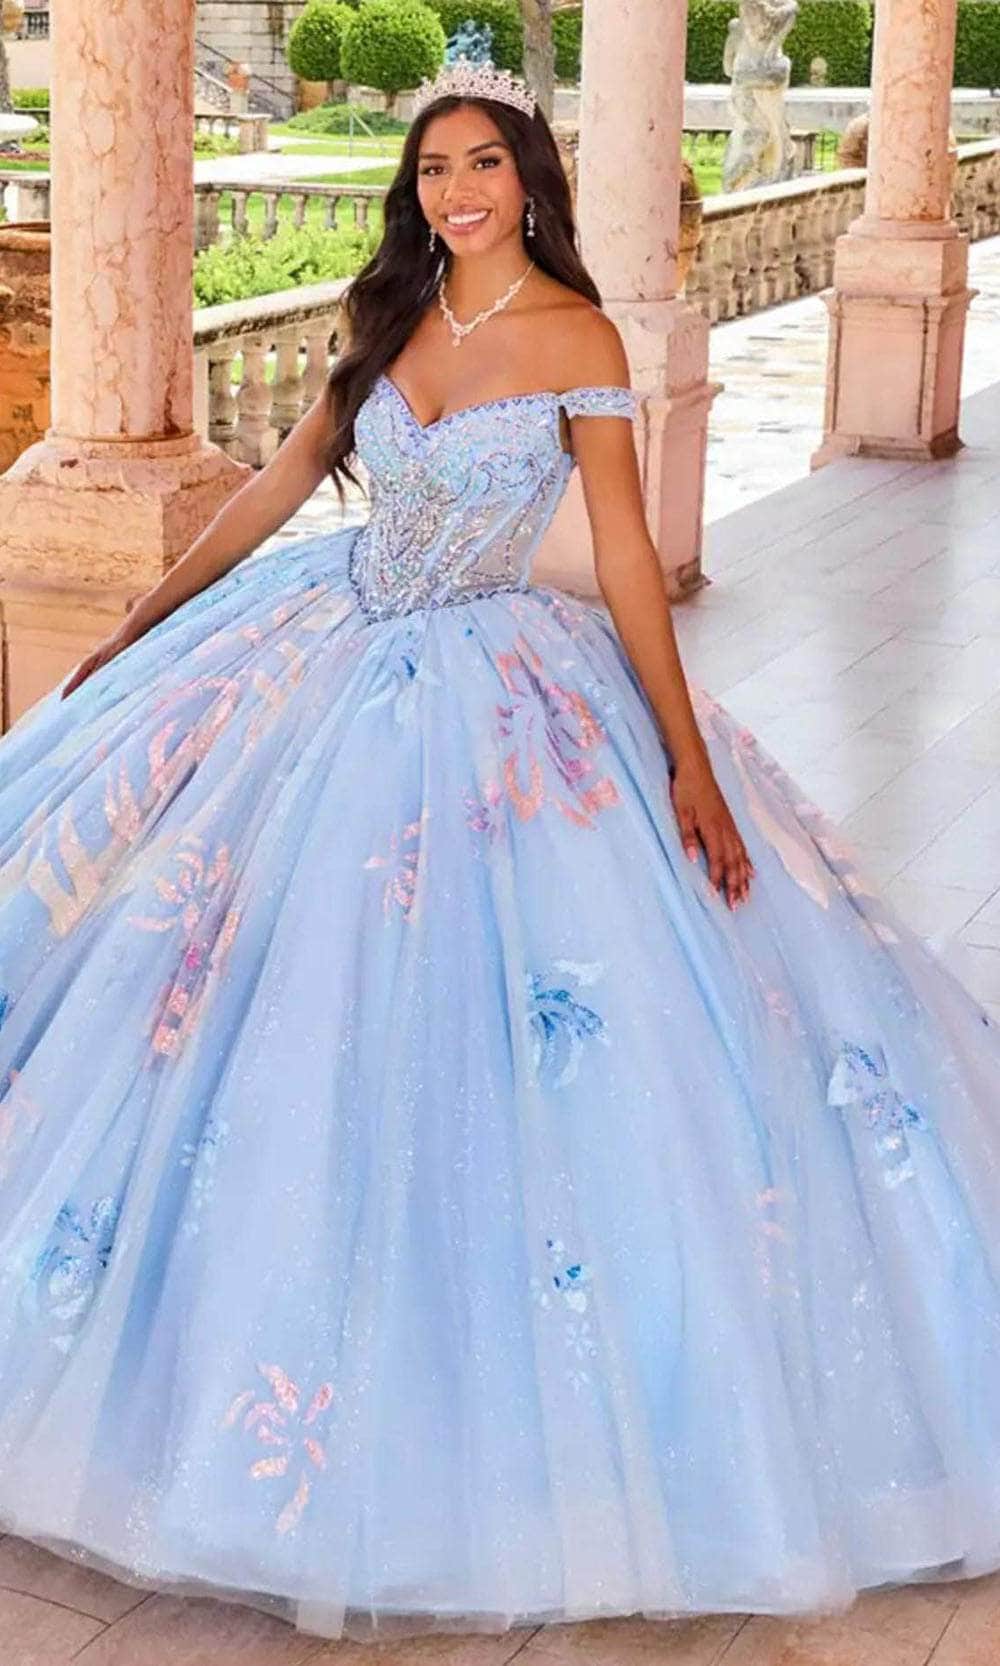 Princesa by Ariana Vara PR30156 - Lace-Up Tie Off-Shoulder Gown Prom Dresses